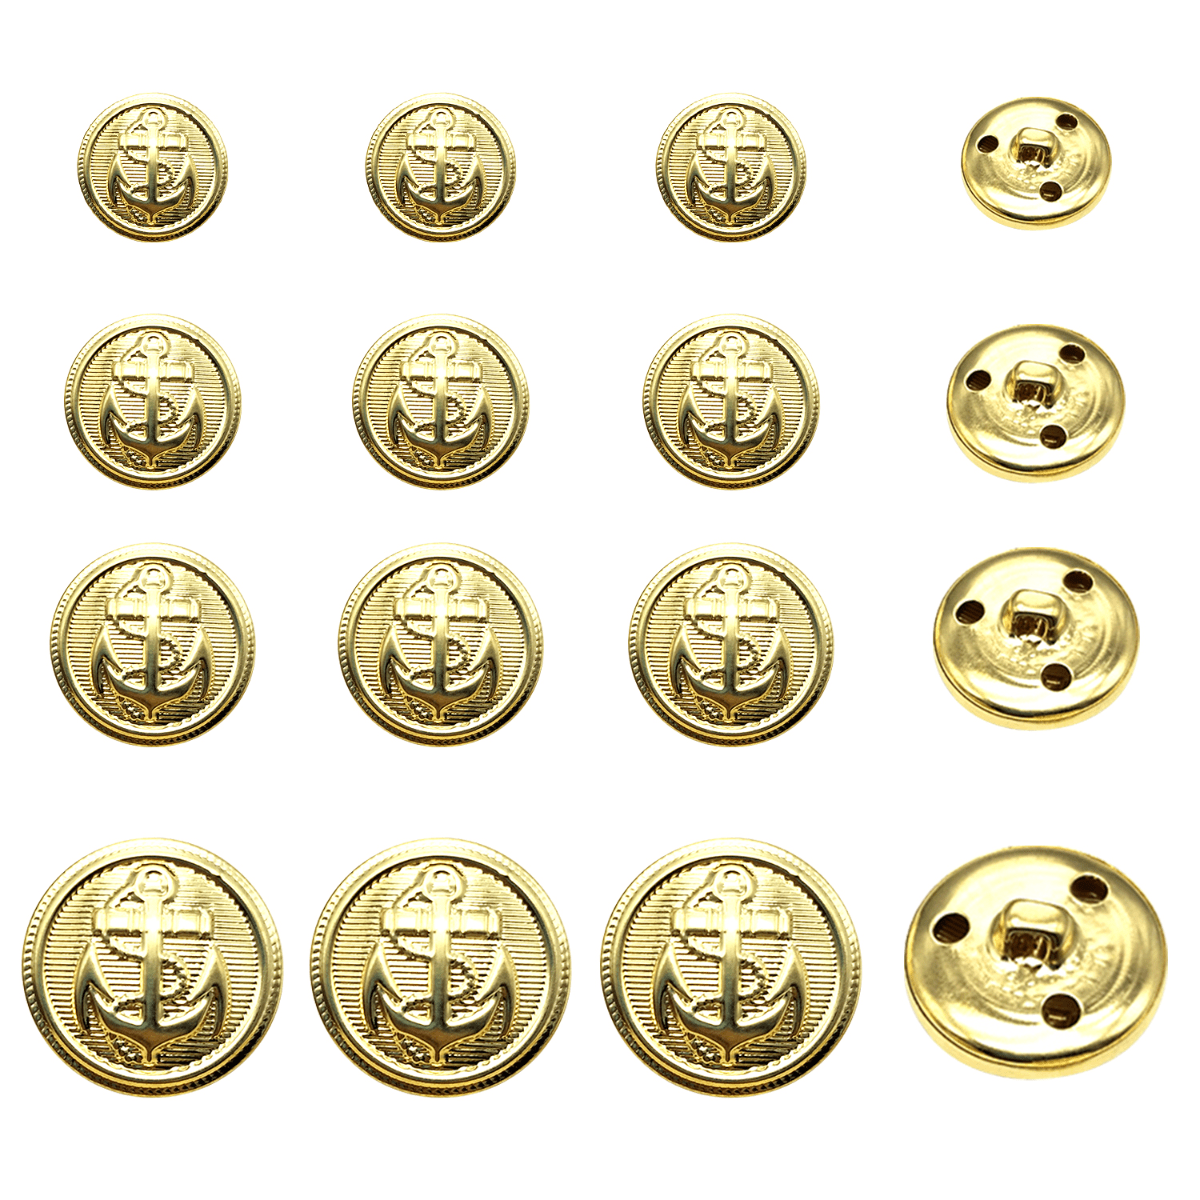 10 Pieces Gold Buttons for Blazer, 20mm Gold Buttons for Jacket Blazer Buttons for Men and Women Metal Buttons for Sewing, Sport Coats, Suits